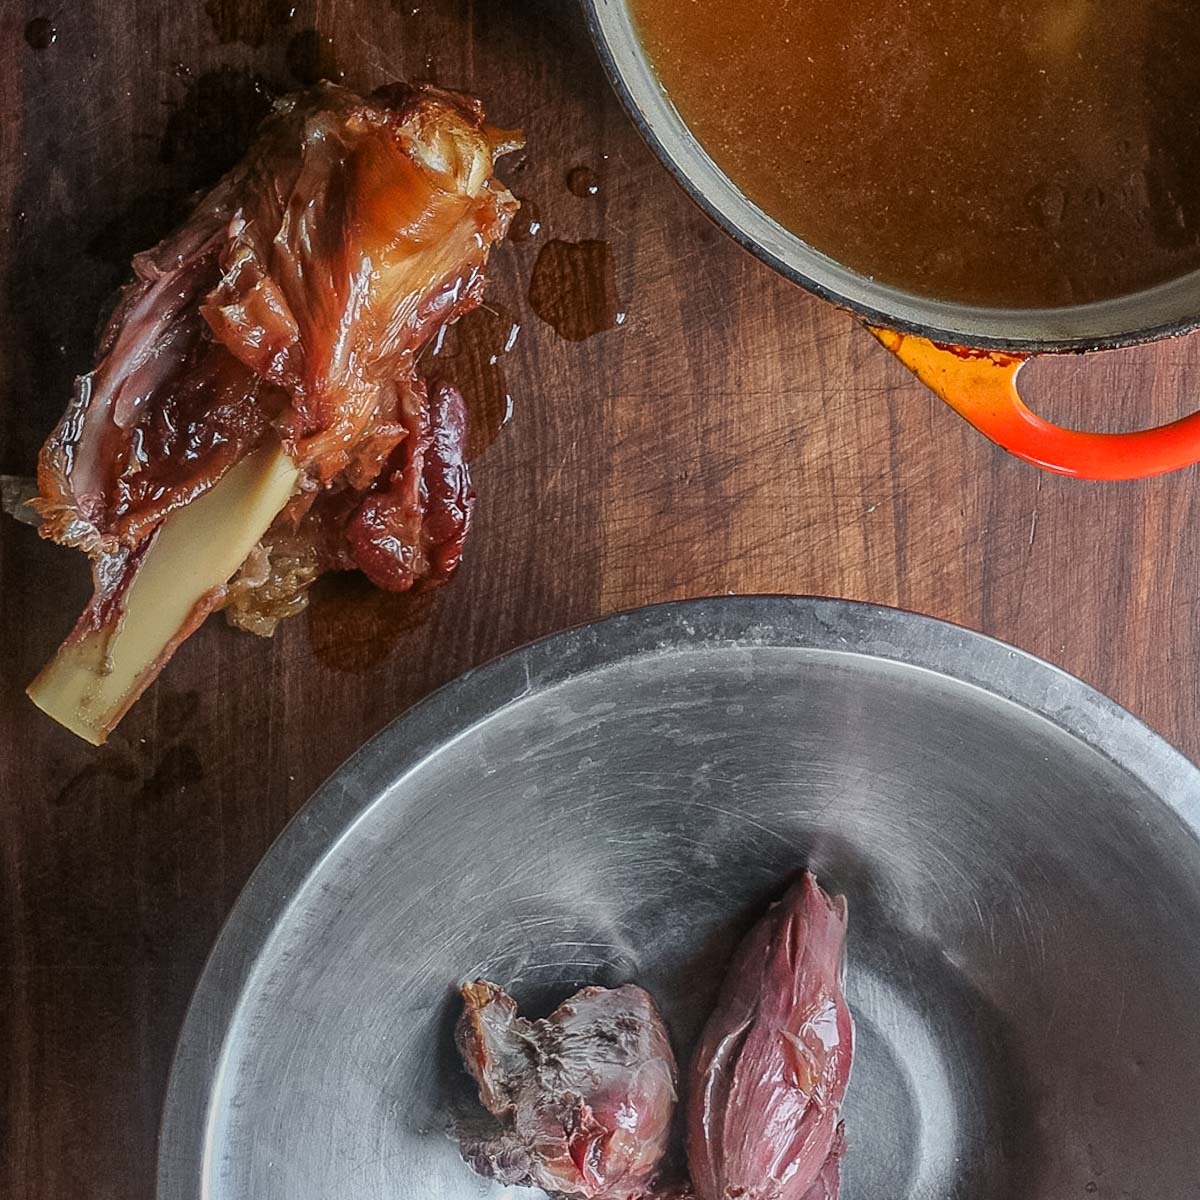 Removing meat from a smoked lamb shank.